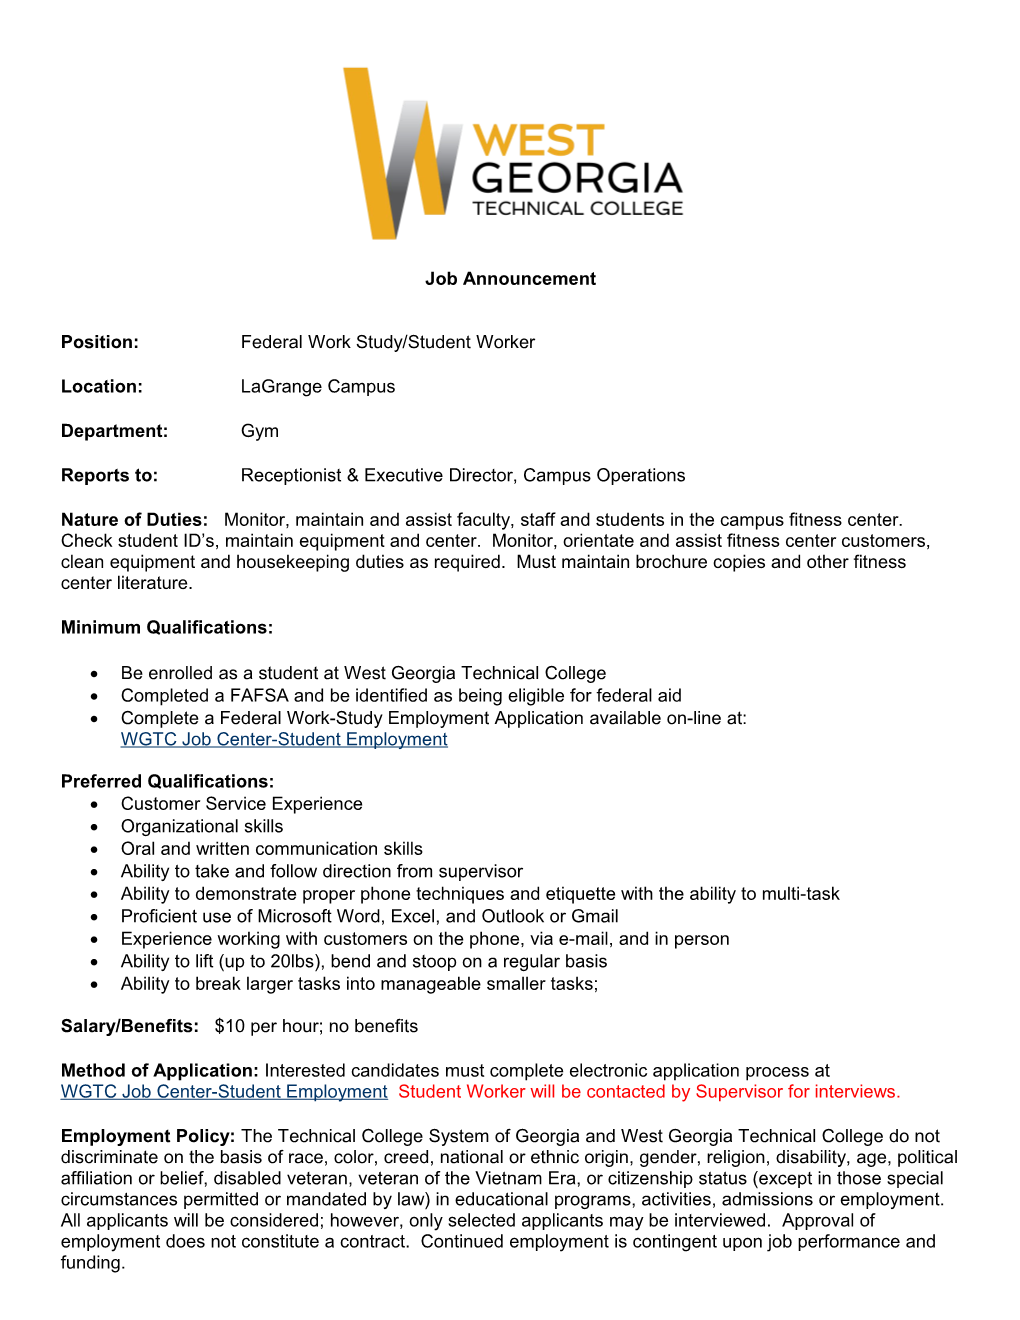 Position: Federal Work Study/Student Worker